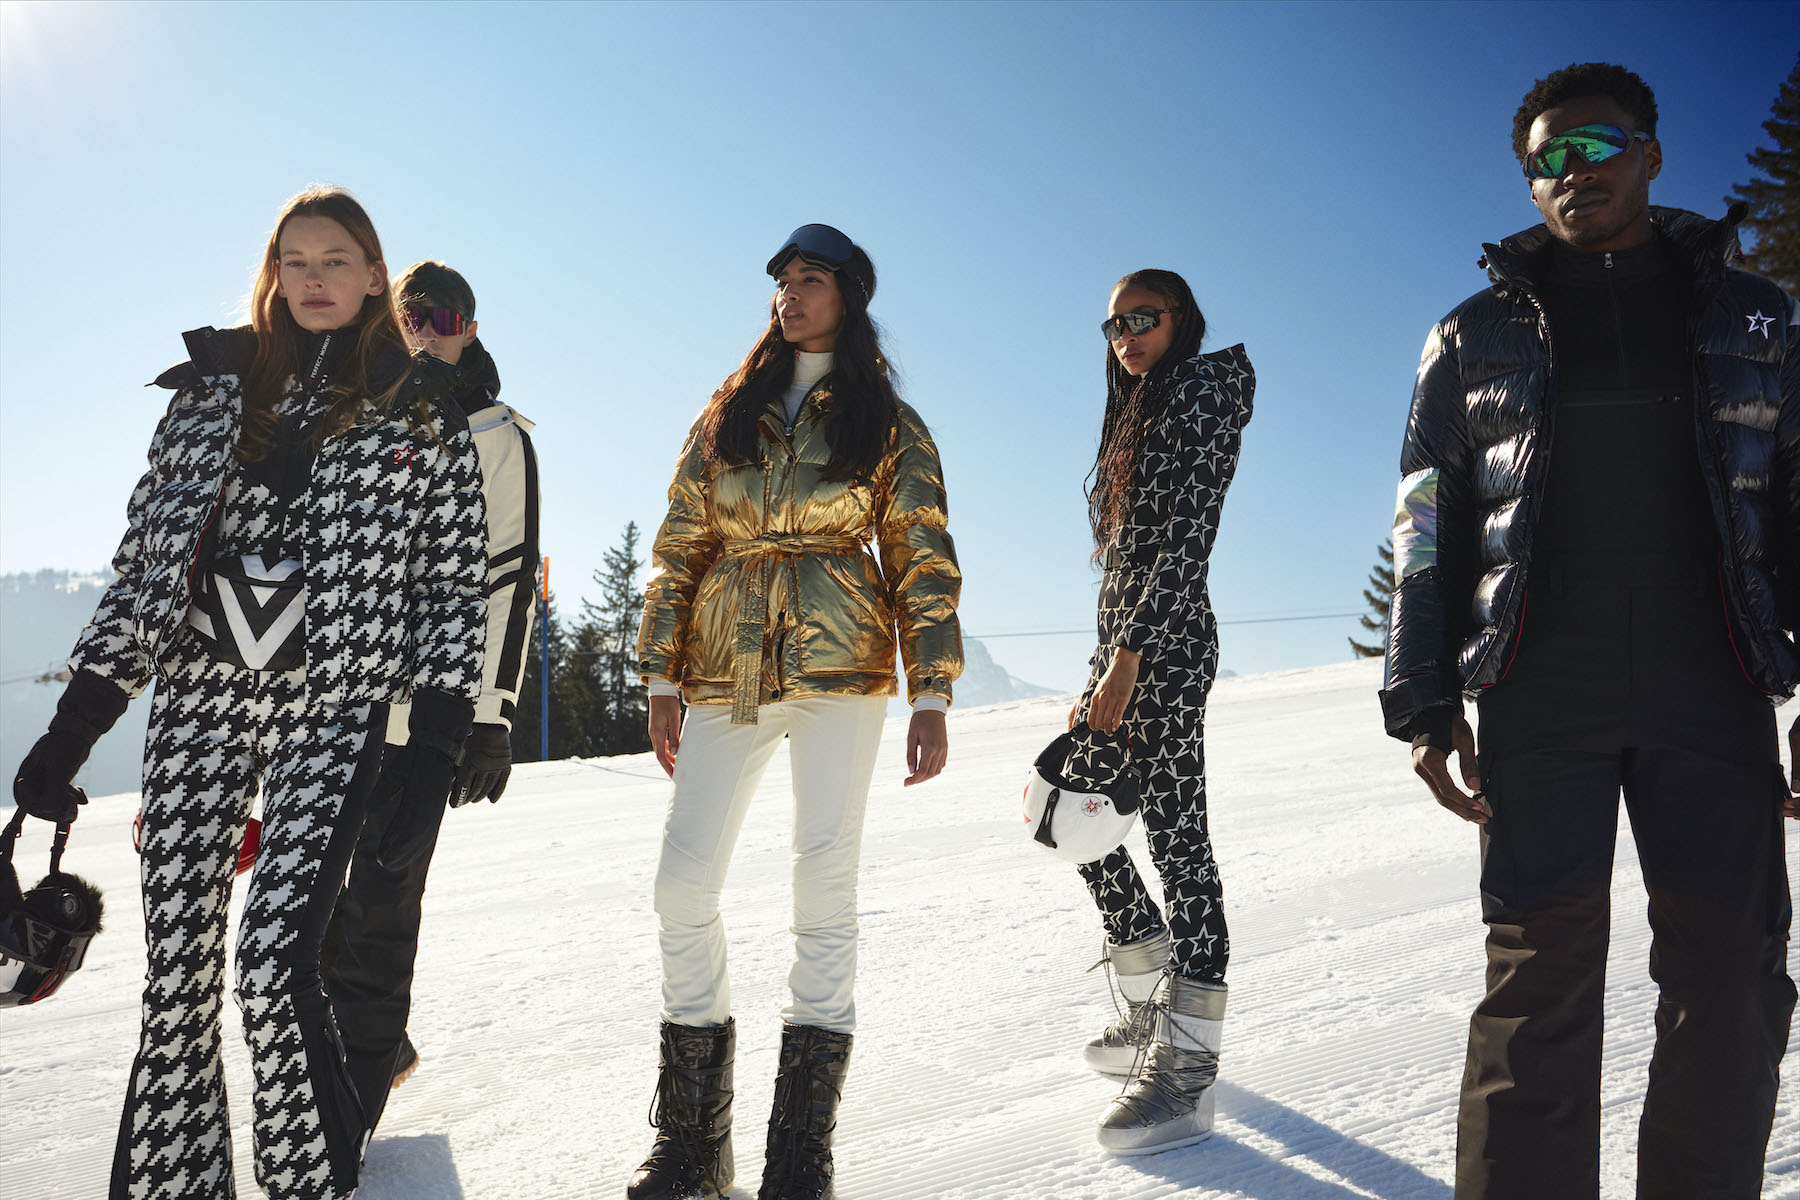 Luxury skiwear company Perfect Moment files for IPO with plans to list on  Nasdaq - MarketWatch